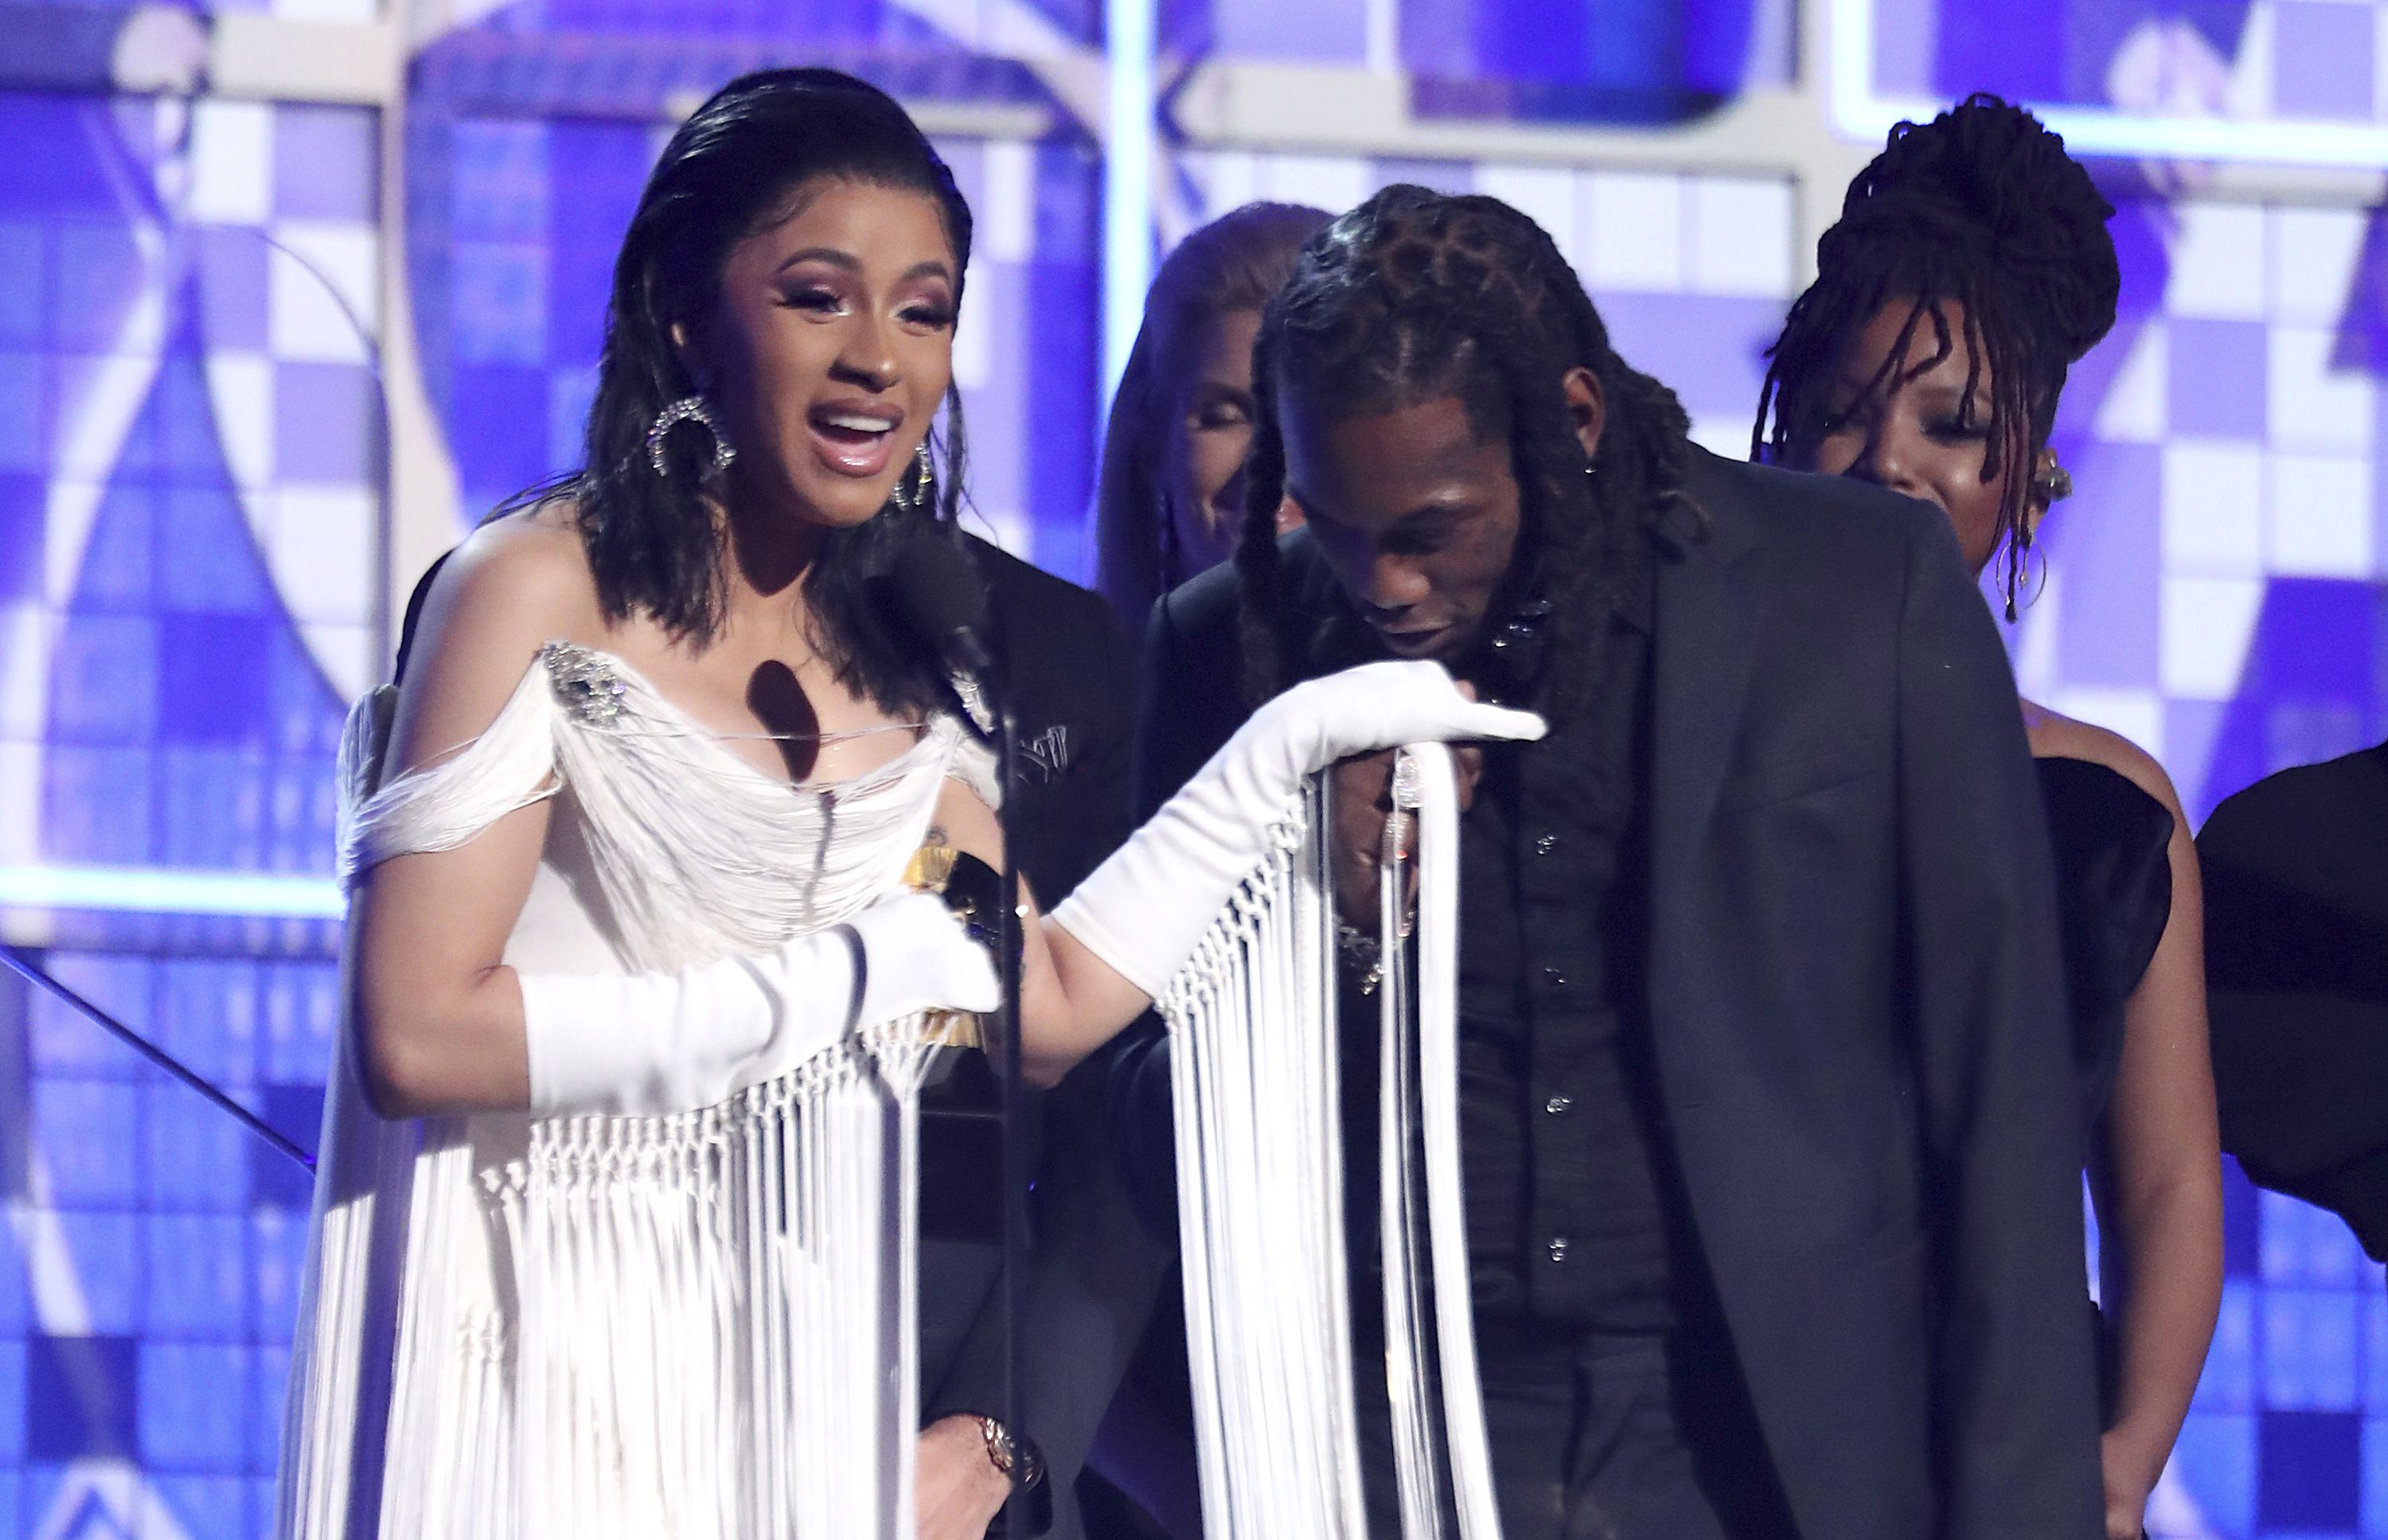 Lil Wayne Having Sex - Will Cardi B, under fire for foul past, get past the moment?